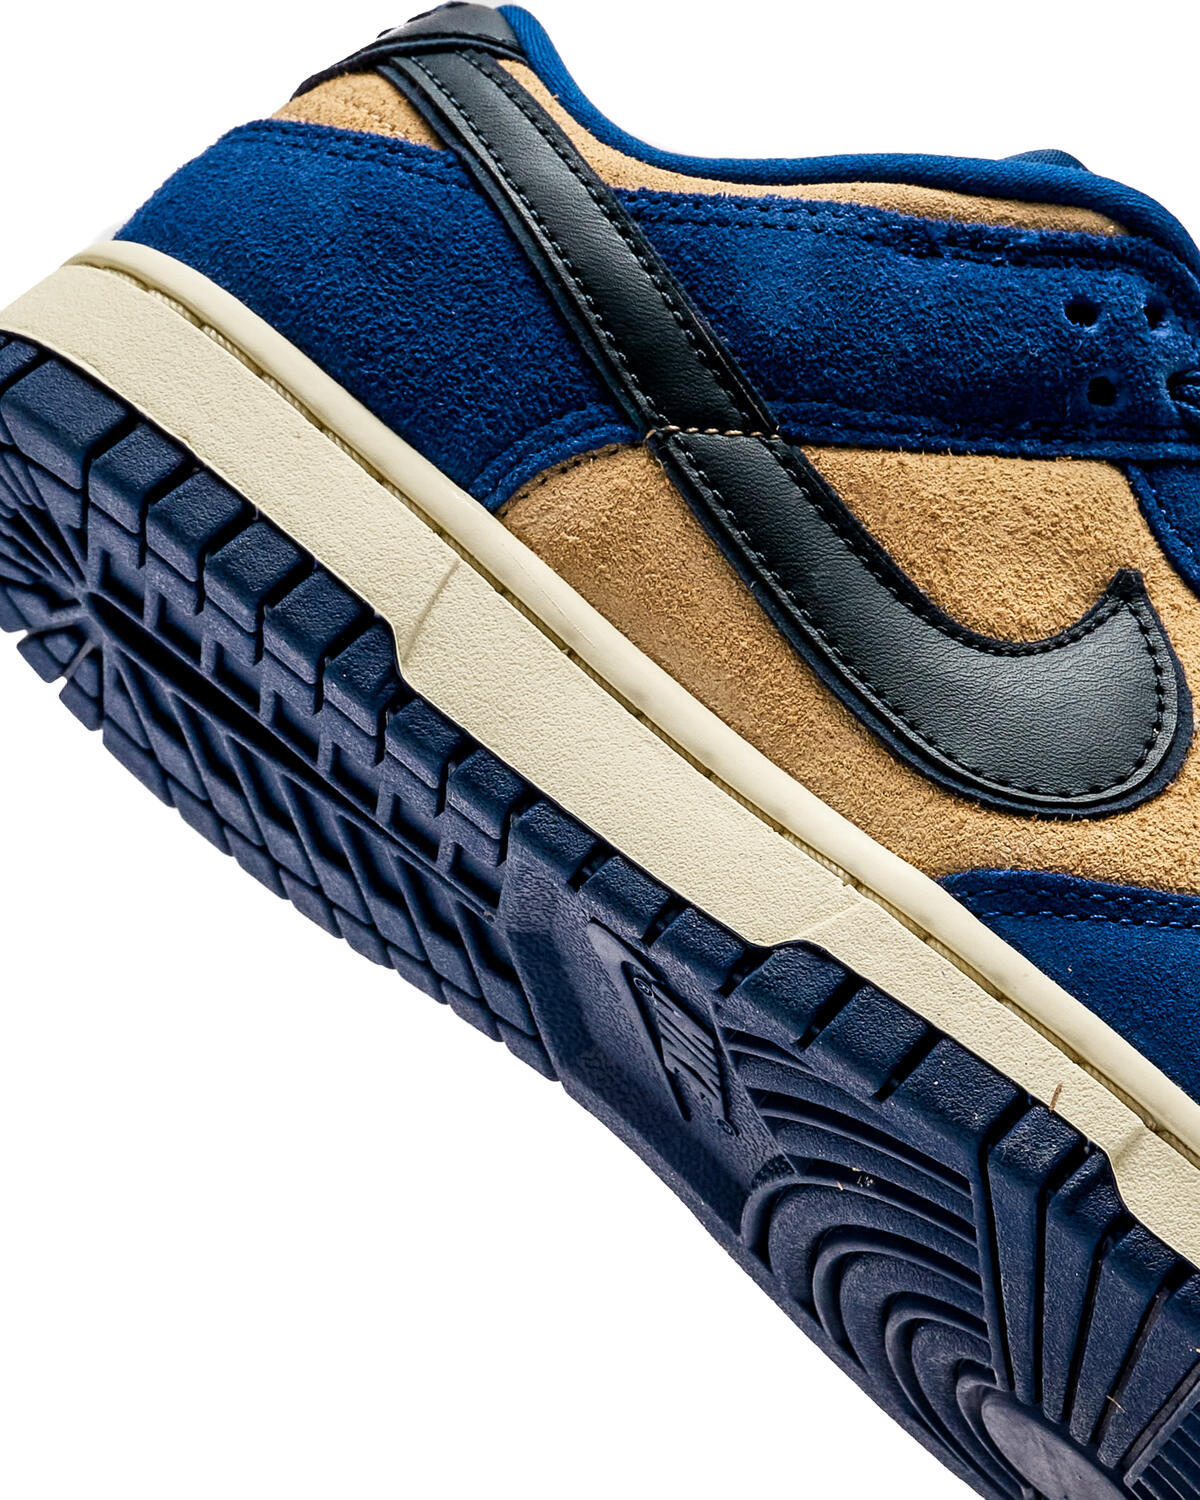 Nike WMNS DUNK LOW LX 'Blue Suede' | DV7411-400 | AFEW STORE